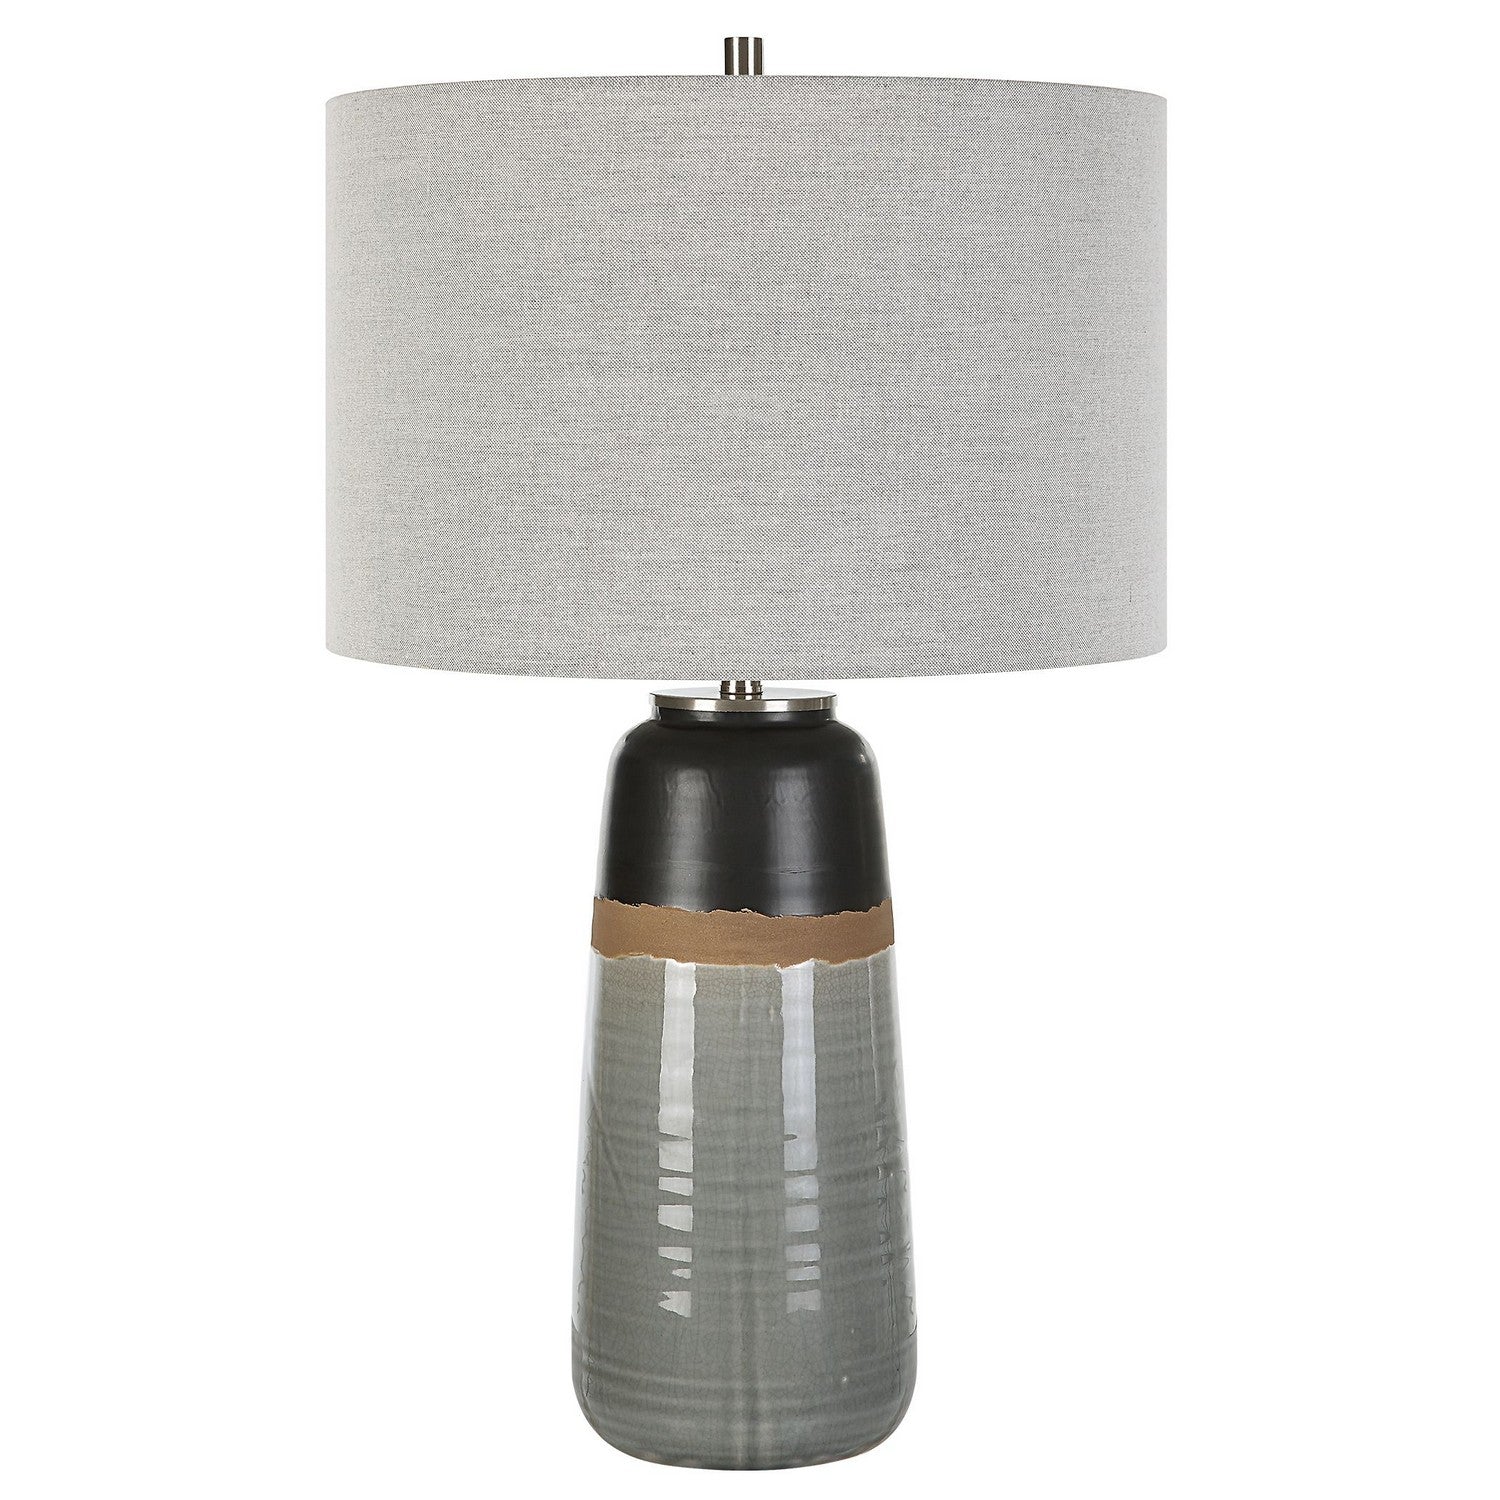 Uttermost - 30219-1 - One Light Table Lamp - Coen - Brushed Nickel